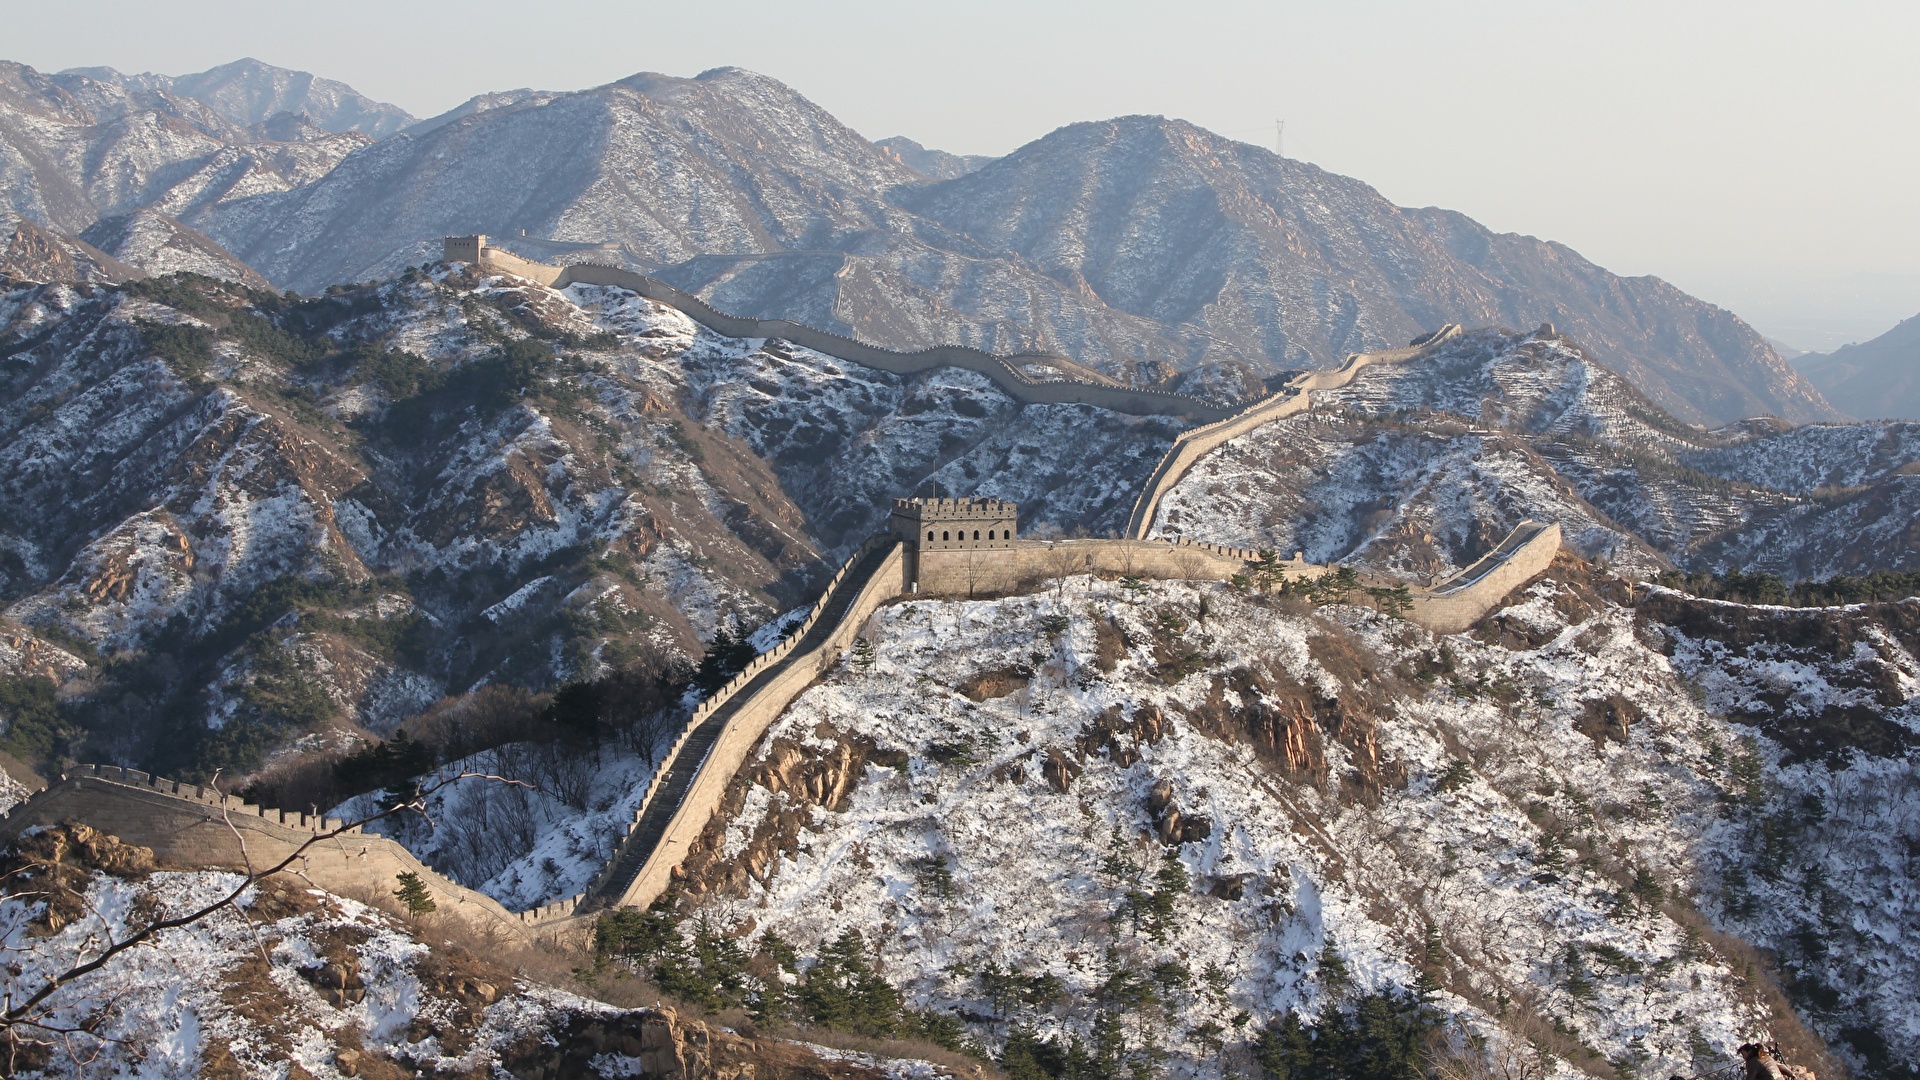 Images China Winter Mountains The Great Wall of China Snow 1920x1080 1920x1080